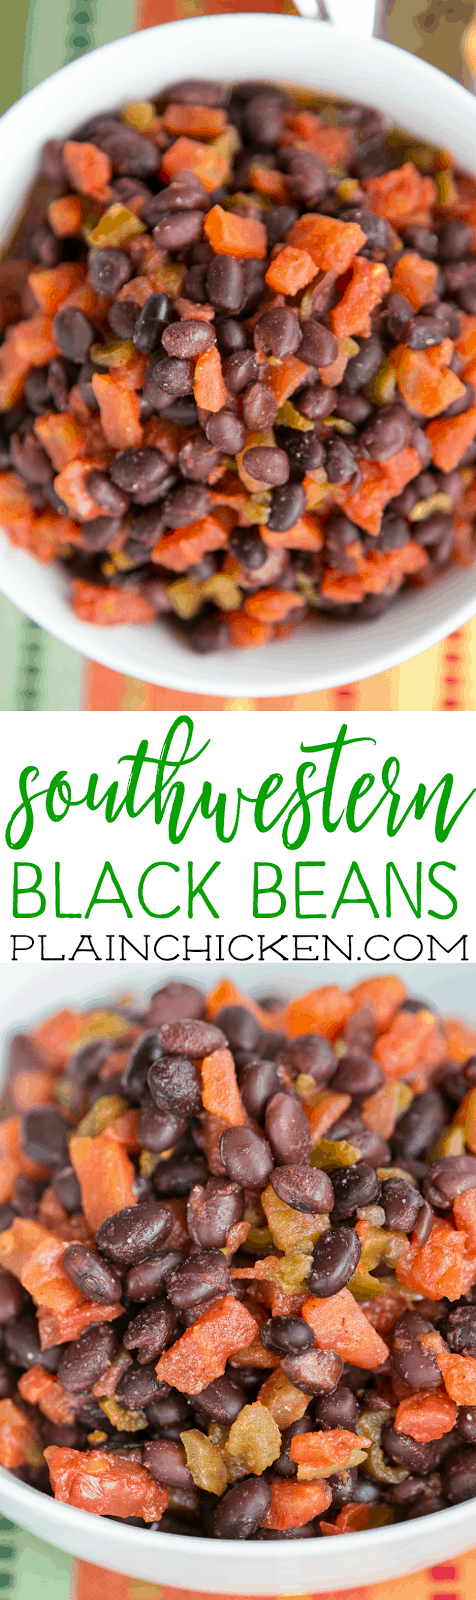 Southwestern Black Beans - only 4 ingredients! Black beans, diced tomatoes and green chiles, chili powder and lime juice. We make them all the time! Ready in 5 minutes!! Such a quick and easy side dish!!